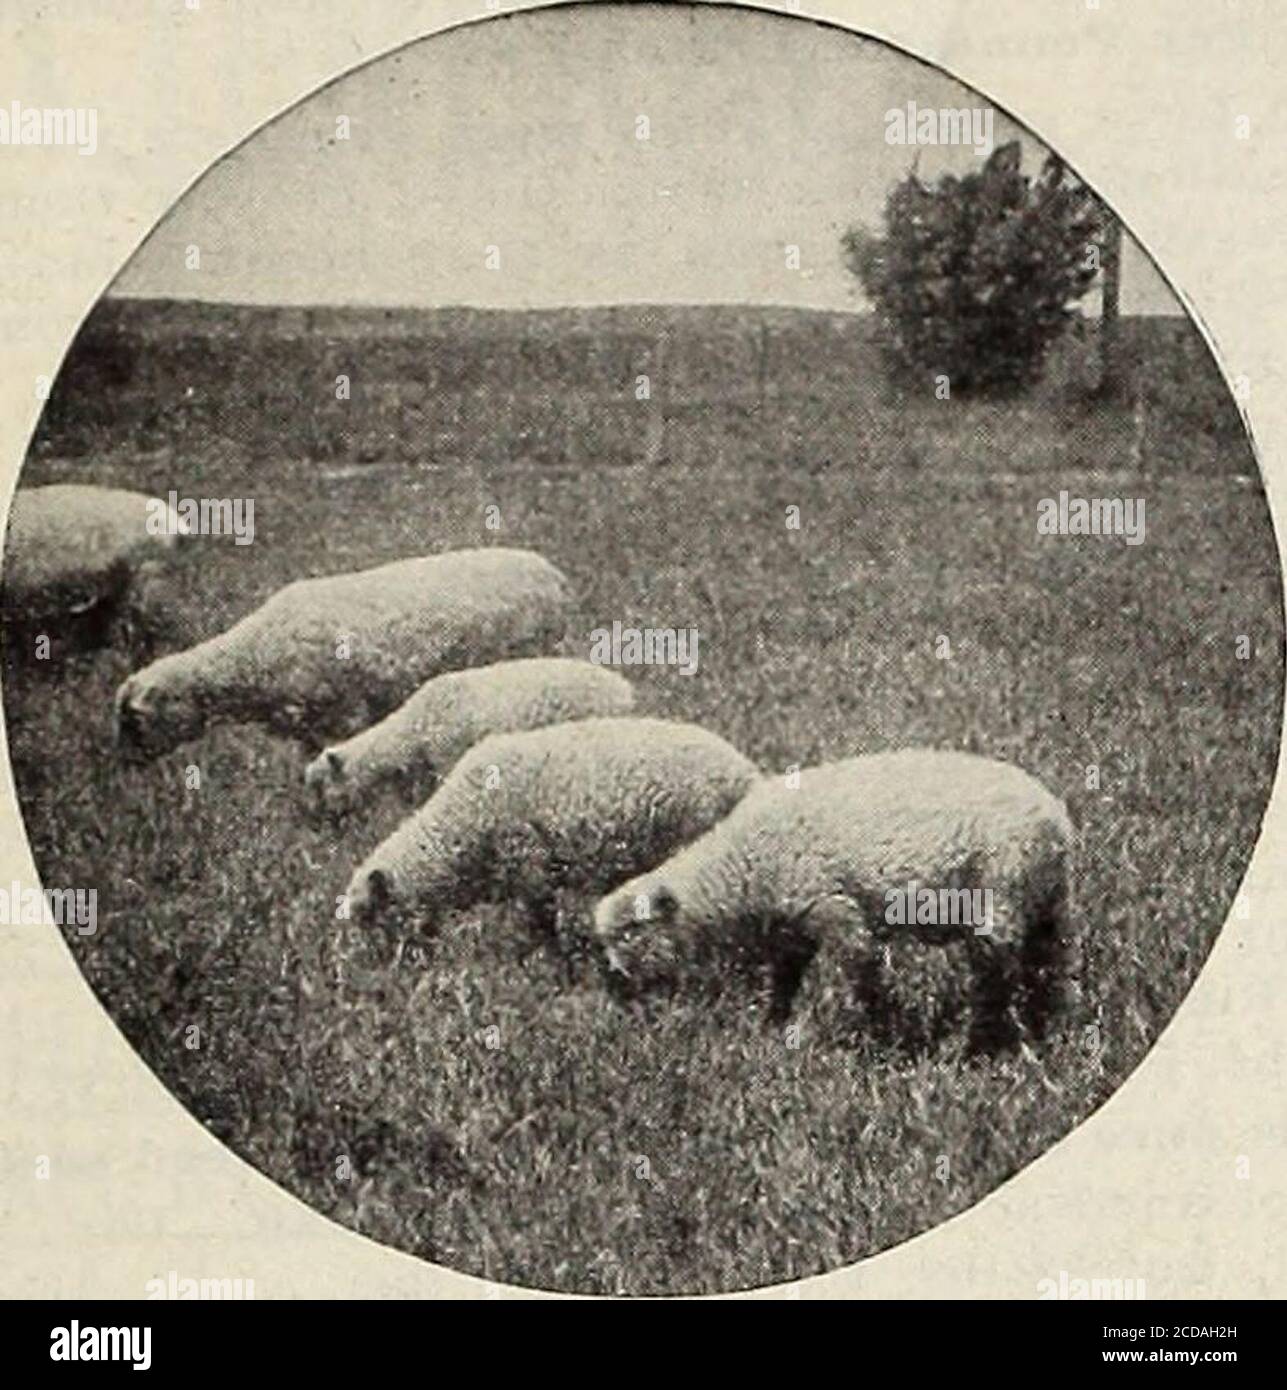 . Farm and garden annual : spring 1913 . lish Rye Grass.Italian Rye Grass,Orchard Grass, Sheeps Fescue,Timothy,Red Clover,Alsike Clover.White Clover, e from July to the end Sow 20 lbs. per acre.Cost per acre. .$3.25 50 lbs. lots 7.50 100 lb. lots 15.00 No. 4. Hog Pasture Grass and Clover Mixture. This mixture is composed of varieties that will give thequickest and best results. A sowing made in the early springwill furnish a grand and luxuriant pasture by July of thesame year. No hog raiser should be without an acre or twoof this. Crimson Clover, Italian Rye Grass,Mammoth Clover. Alsike Clover Stock Photo